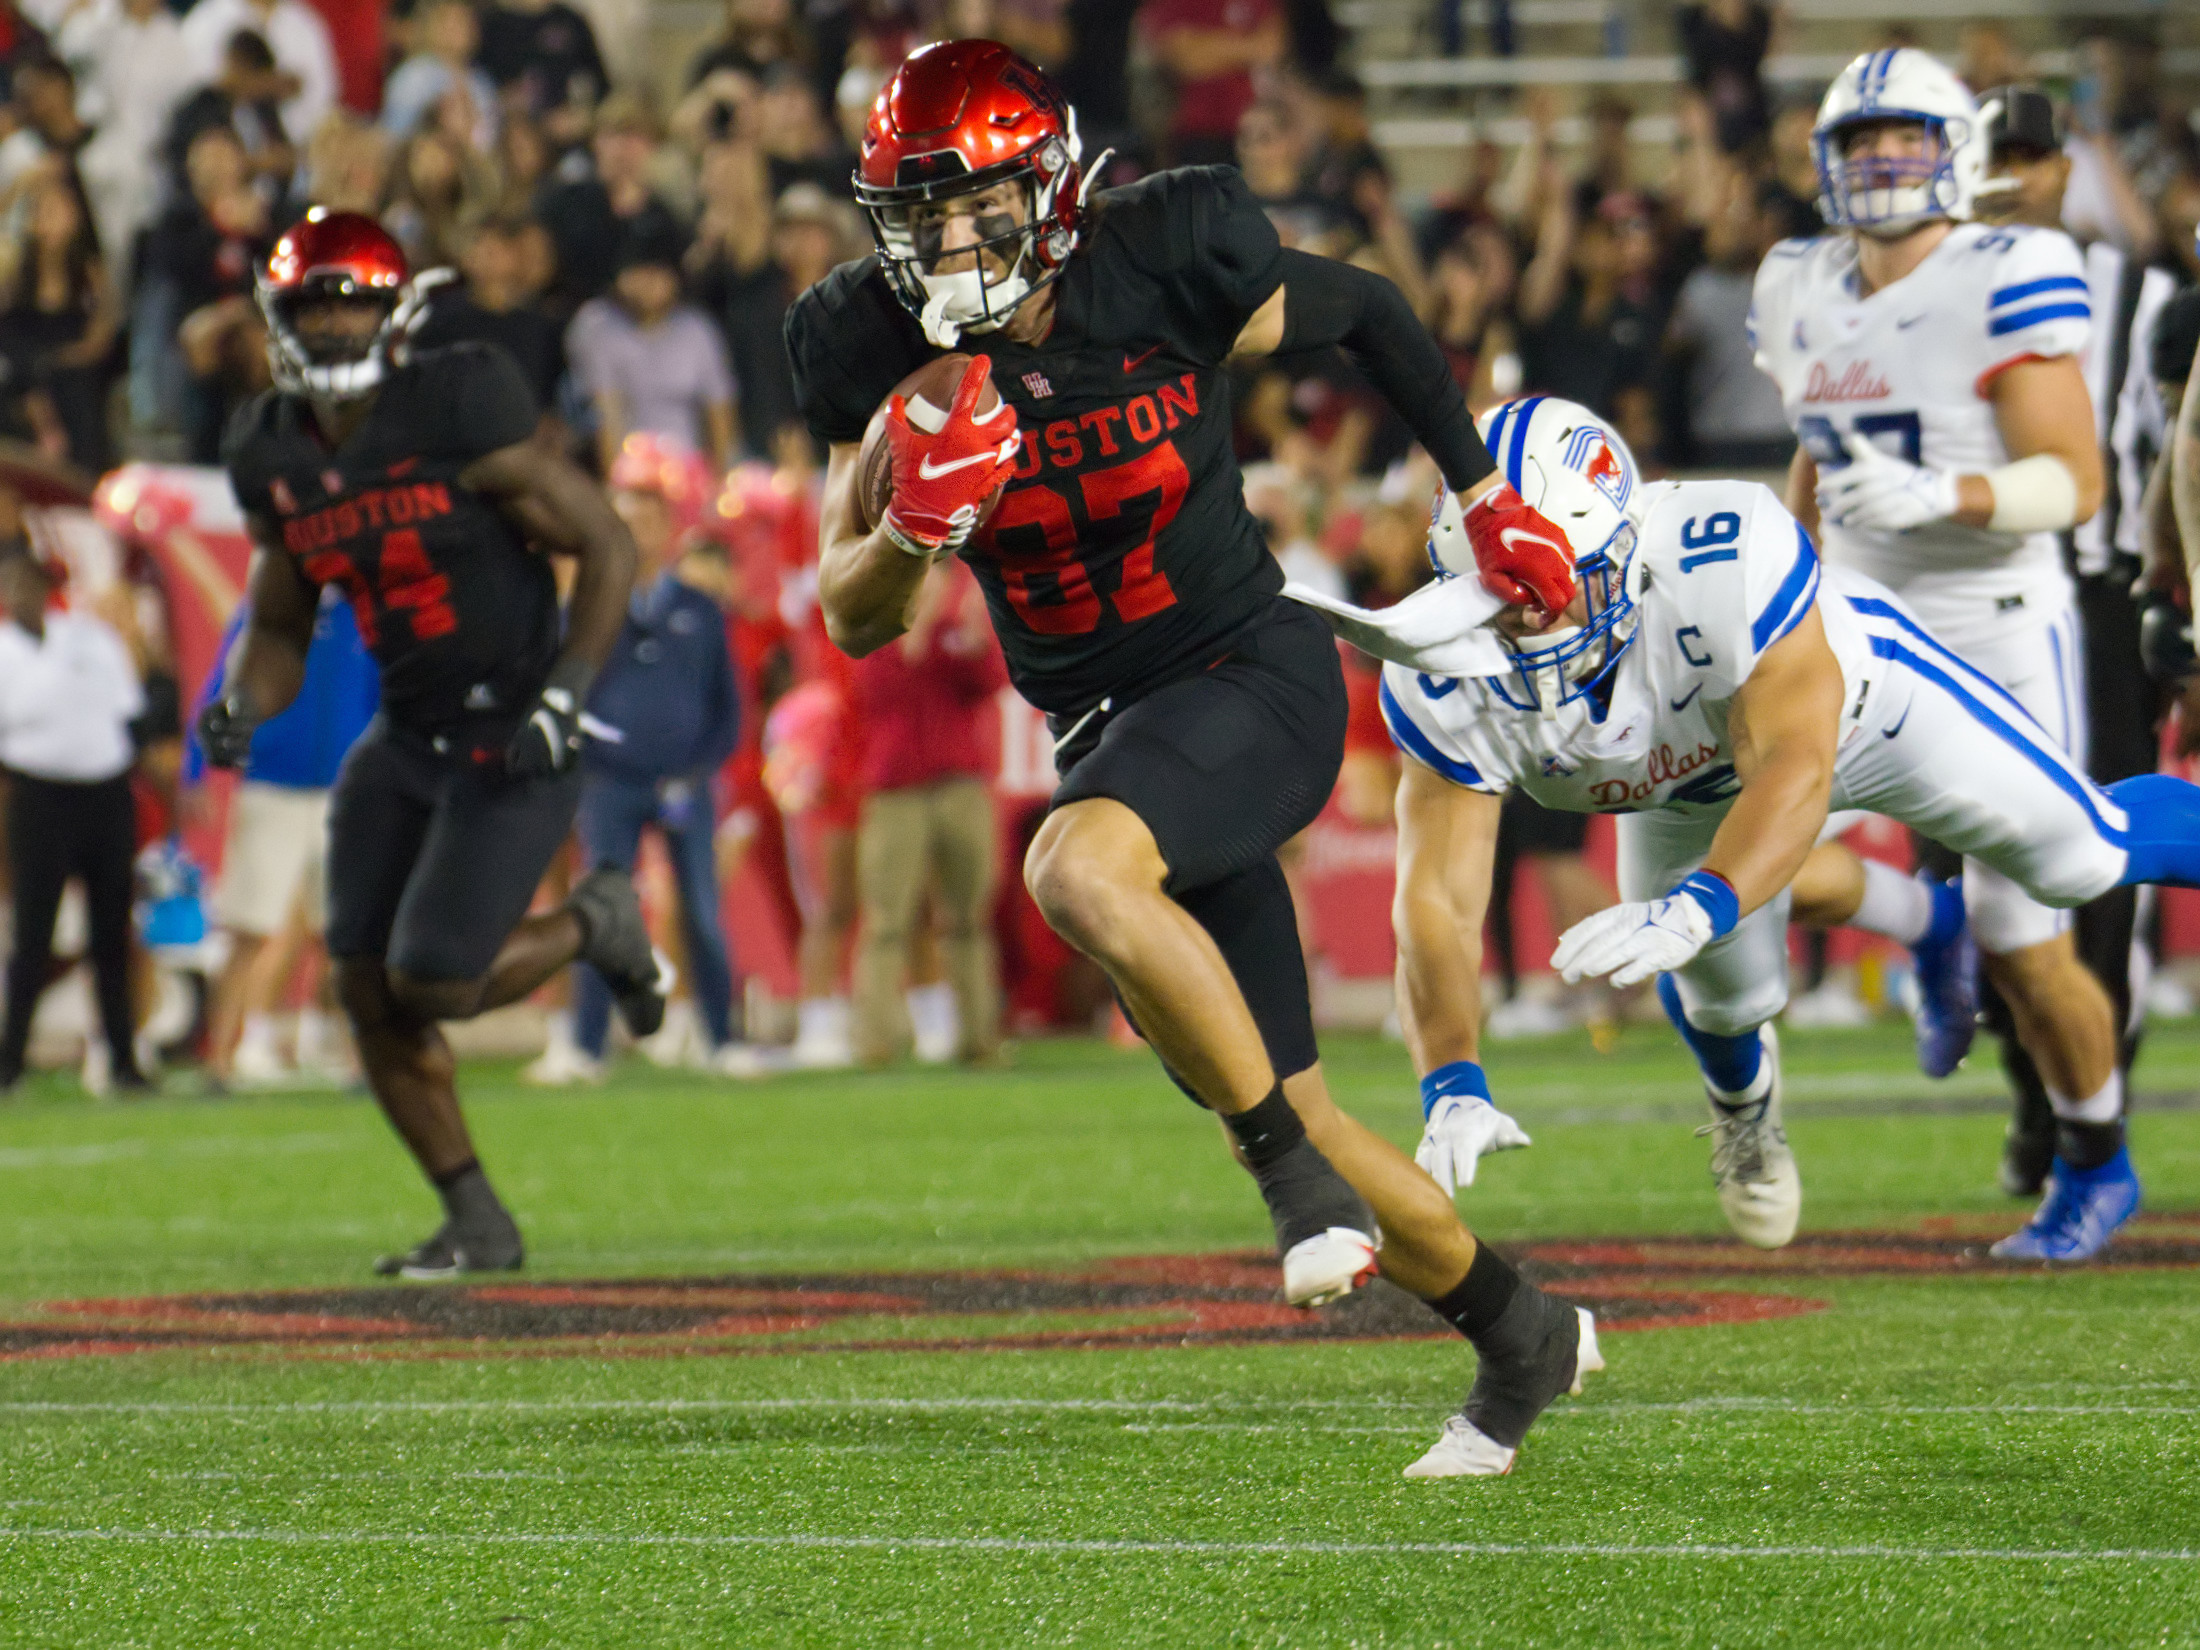 Senior wide receiver Jake Herslow breaks loose for a big game in the second half of the UH football team's win over SMU on Saturday night. | Steven Paultanis/The Cougar